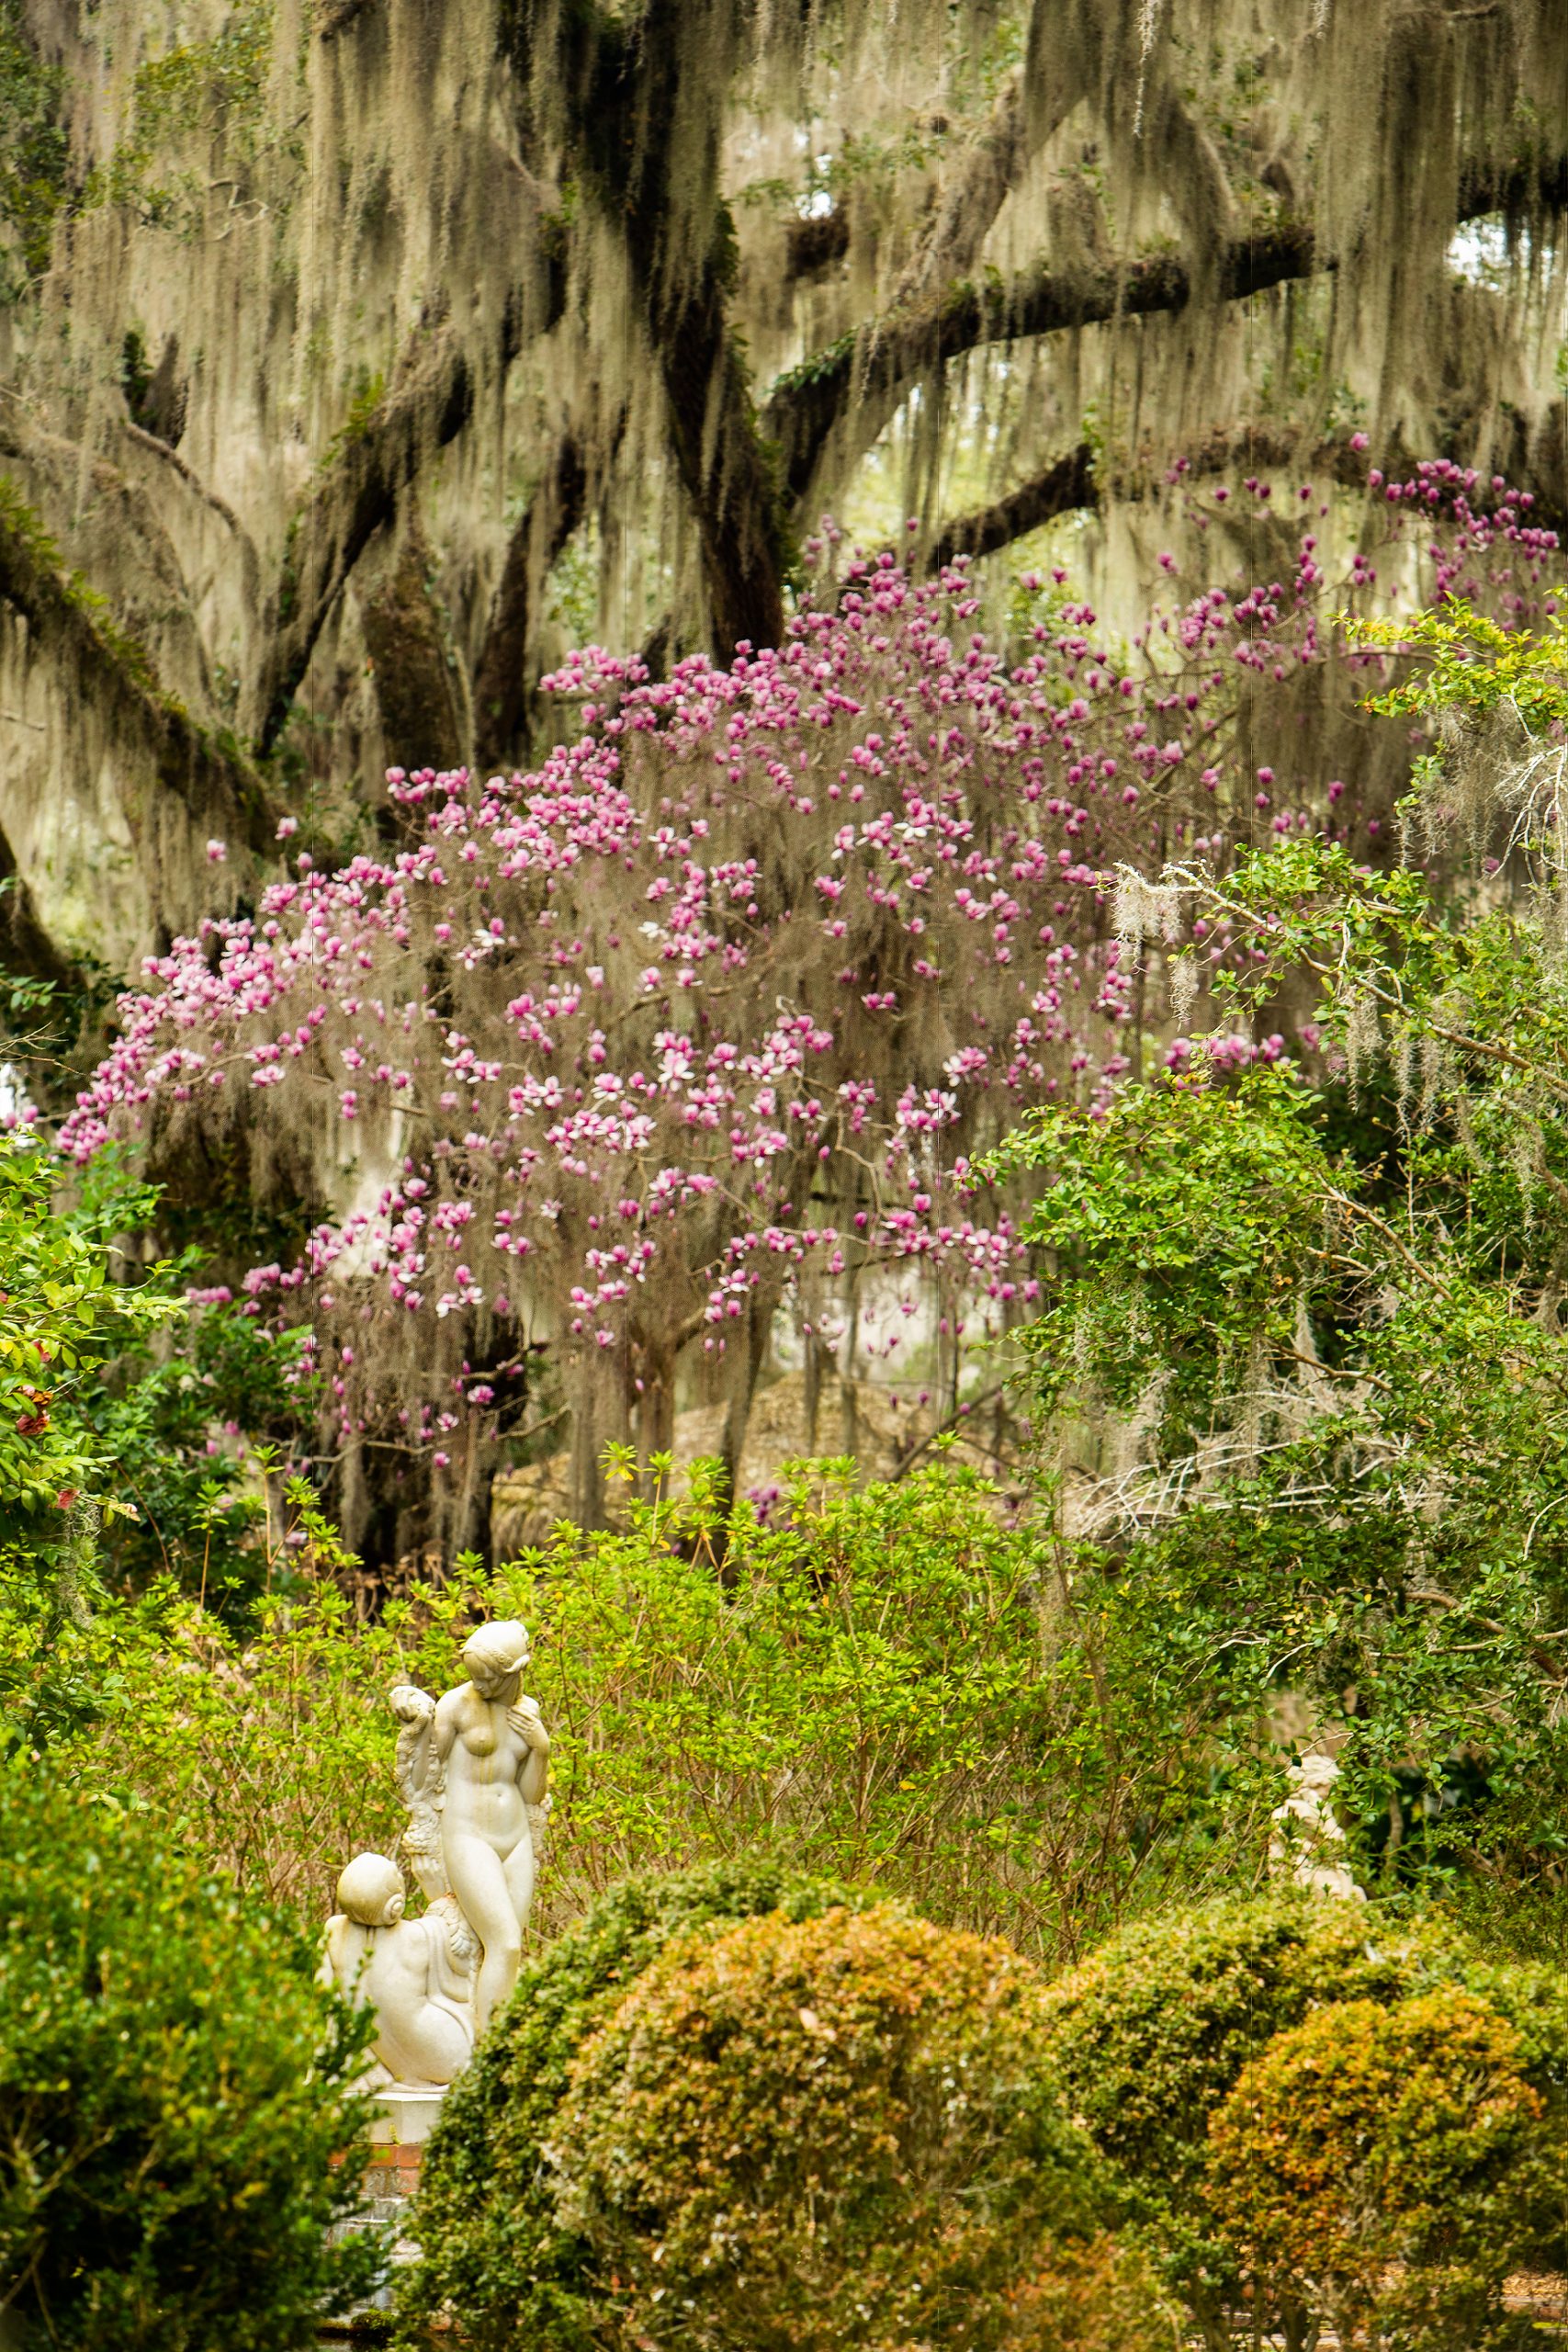 Started as a sculpture garden, Brookgreen Gardens features trees and sculptural displays that provide Spanish moss a backdrop to display nature’s artwork.